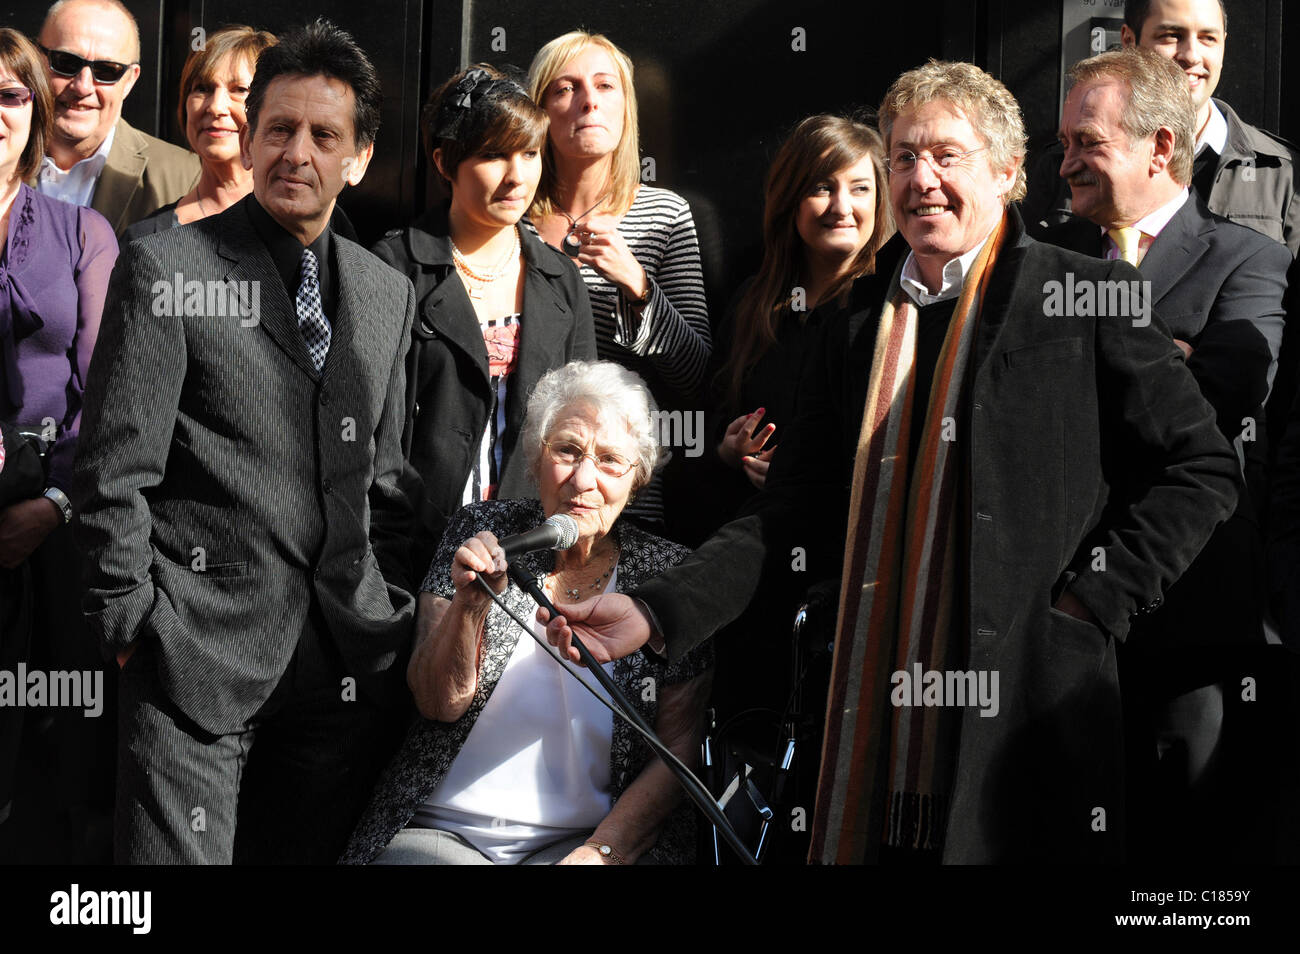 Roger Daltrey and Keith Moon's mother Kit Moon, along with family and